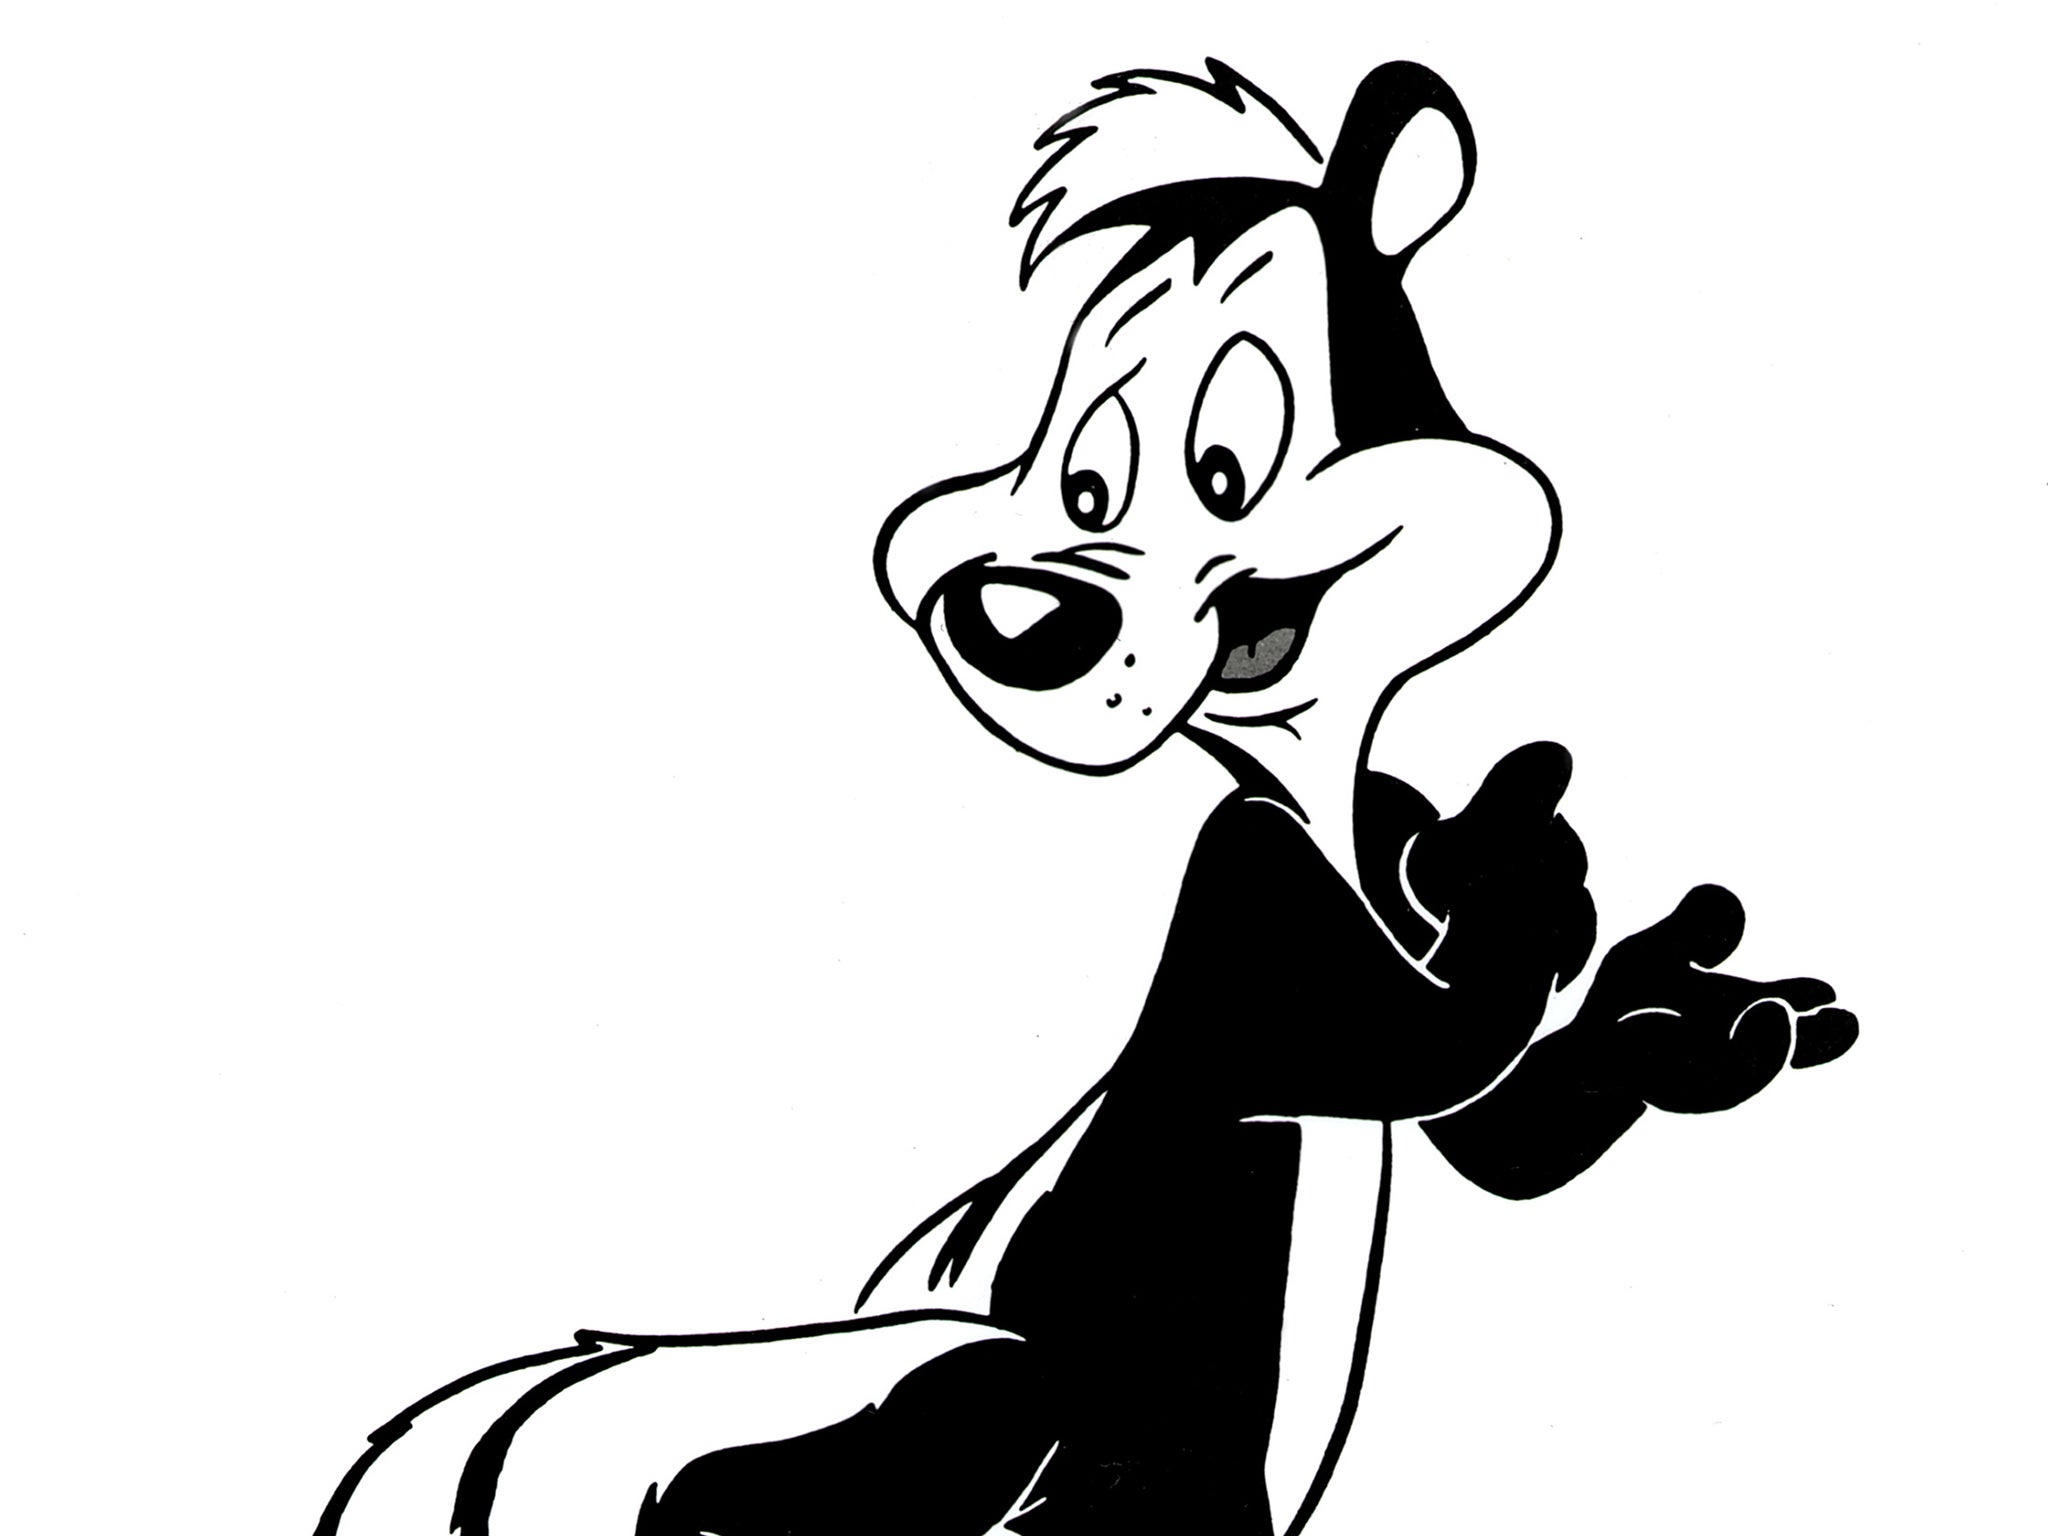 Looney Tunes character Pepe Le Pew